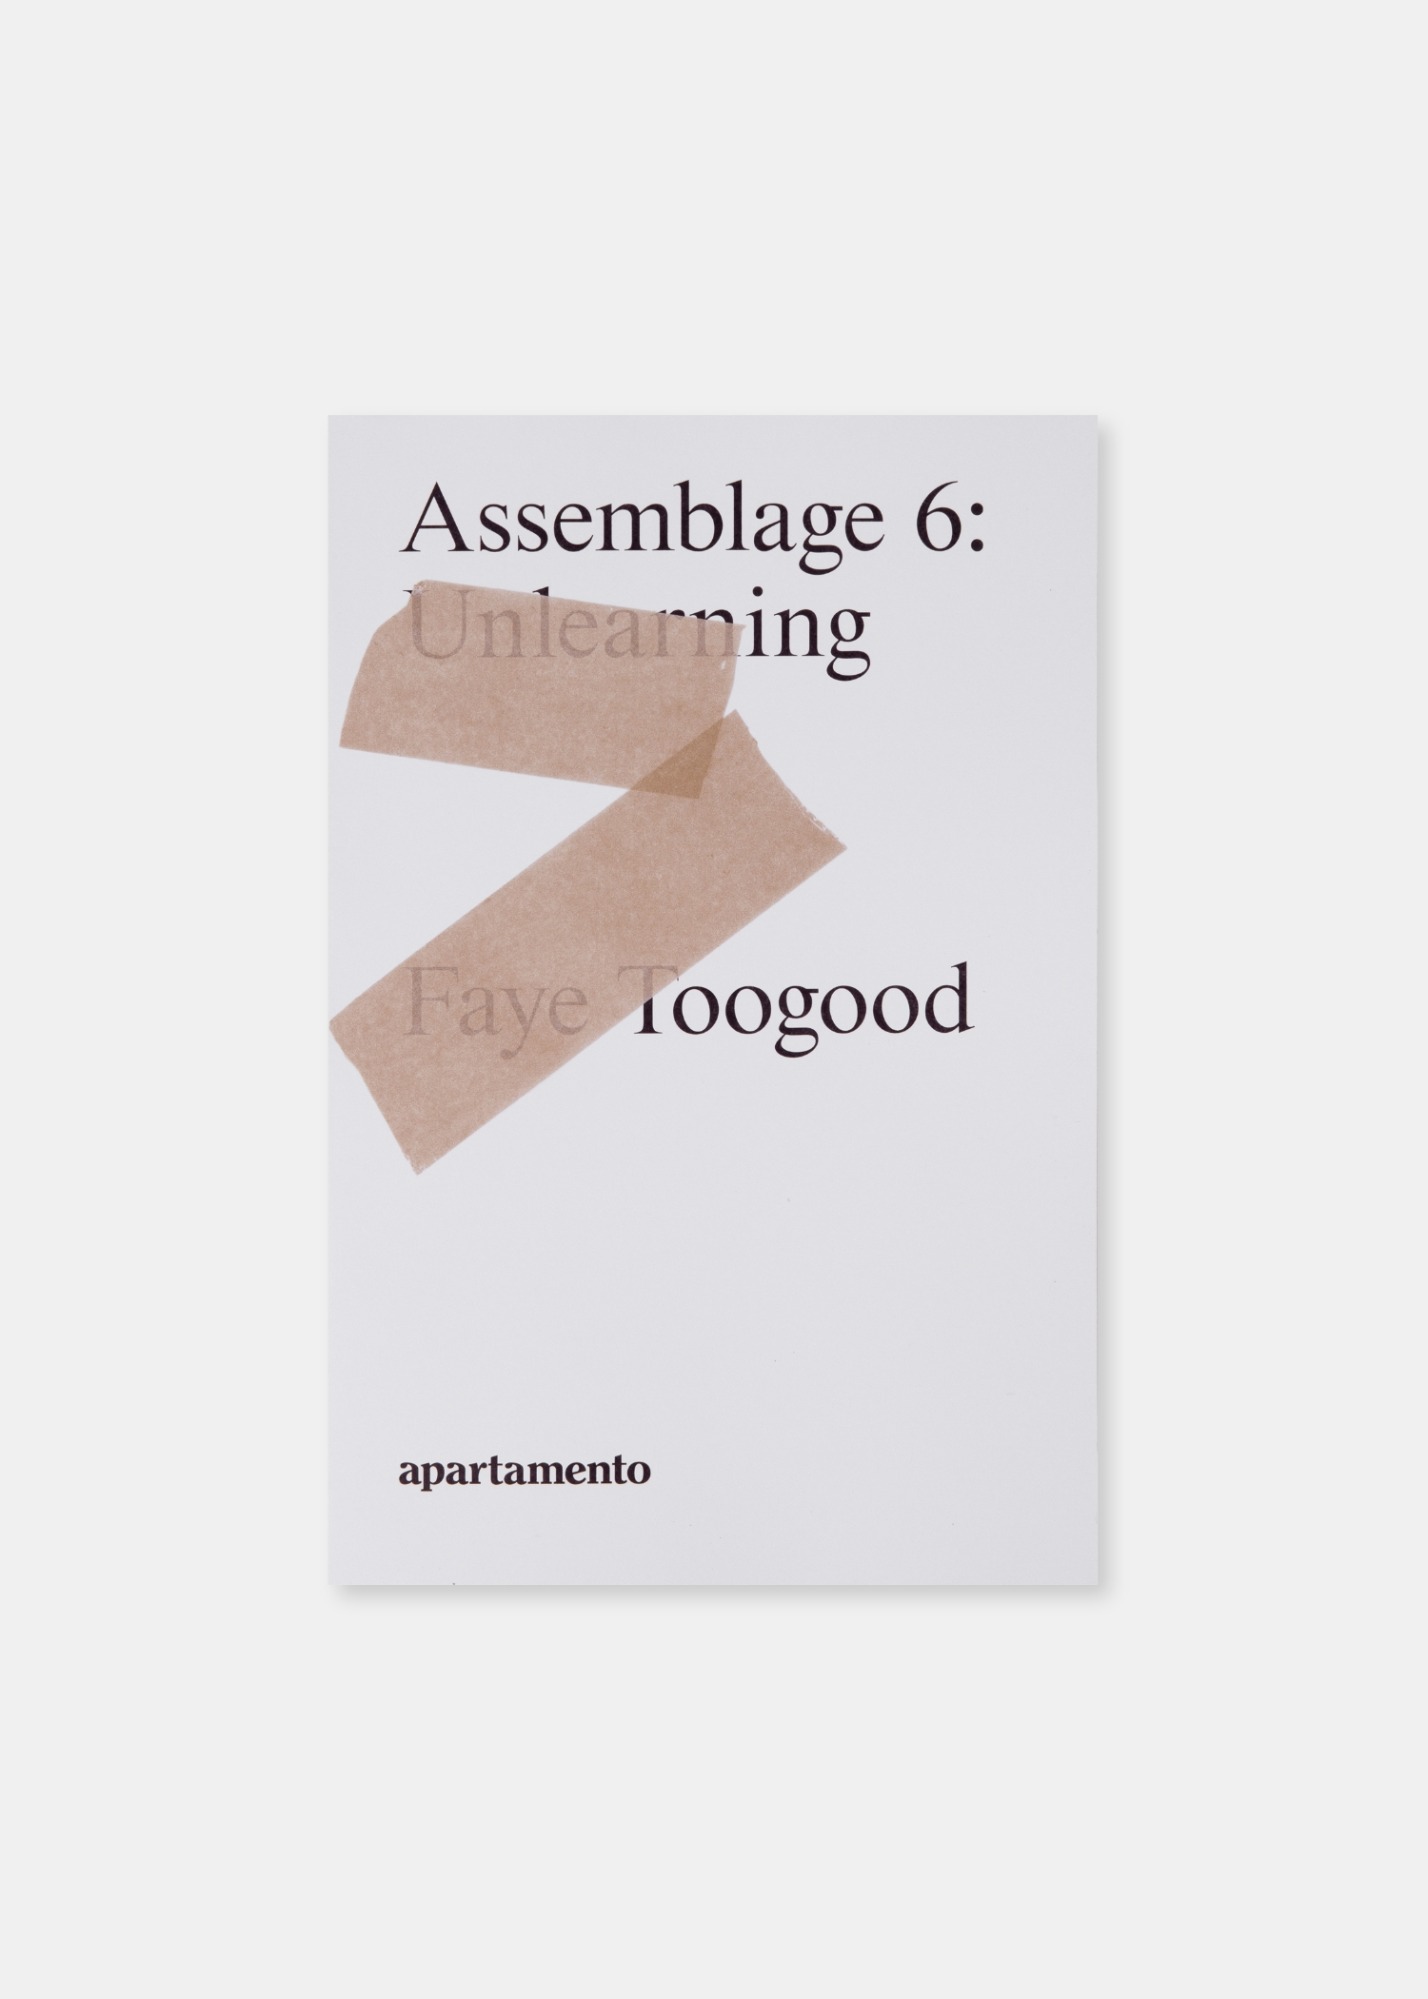 Faye Toogood: Assemblage 6, Unlearning